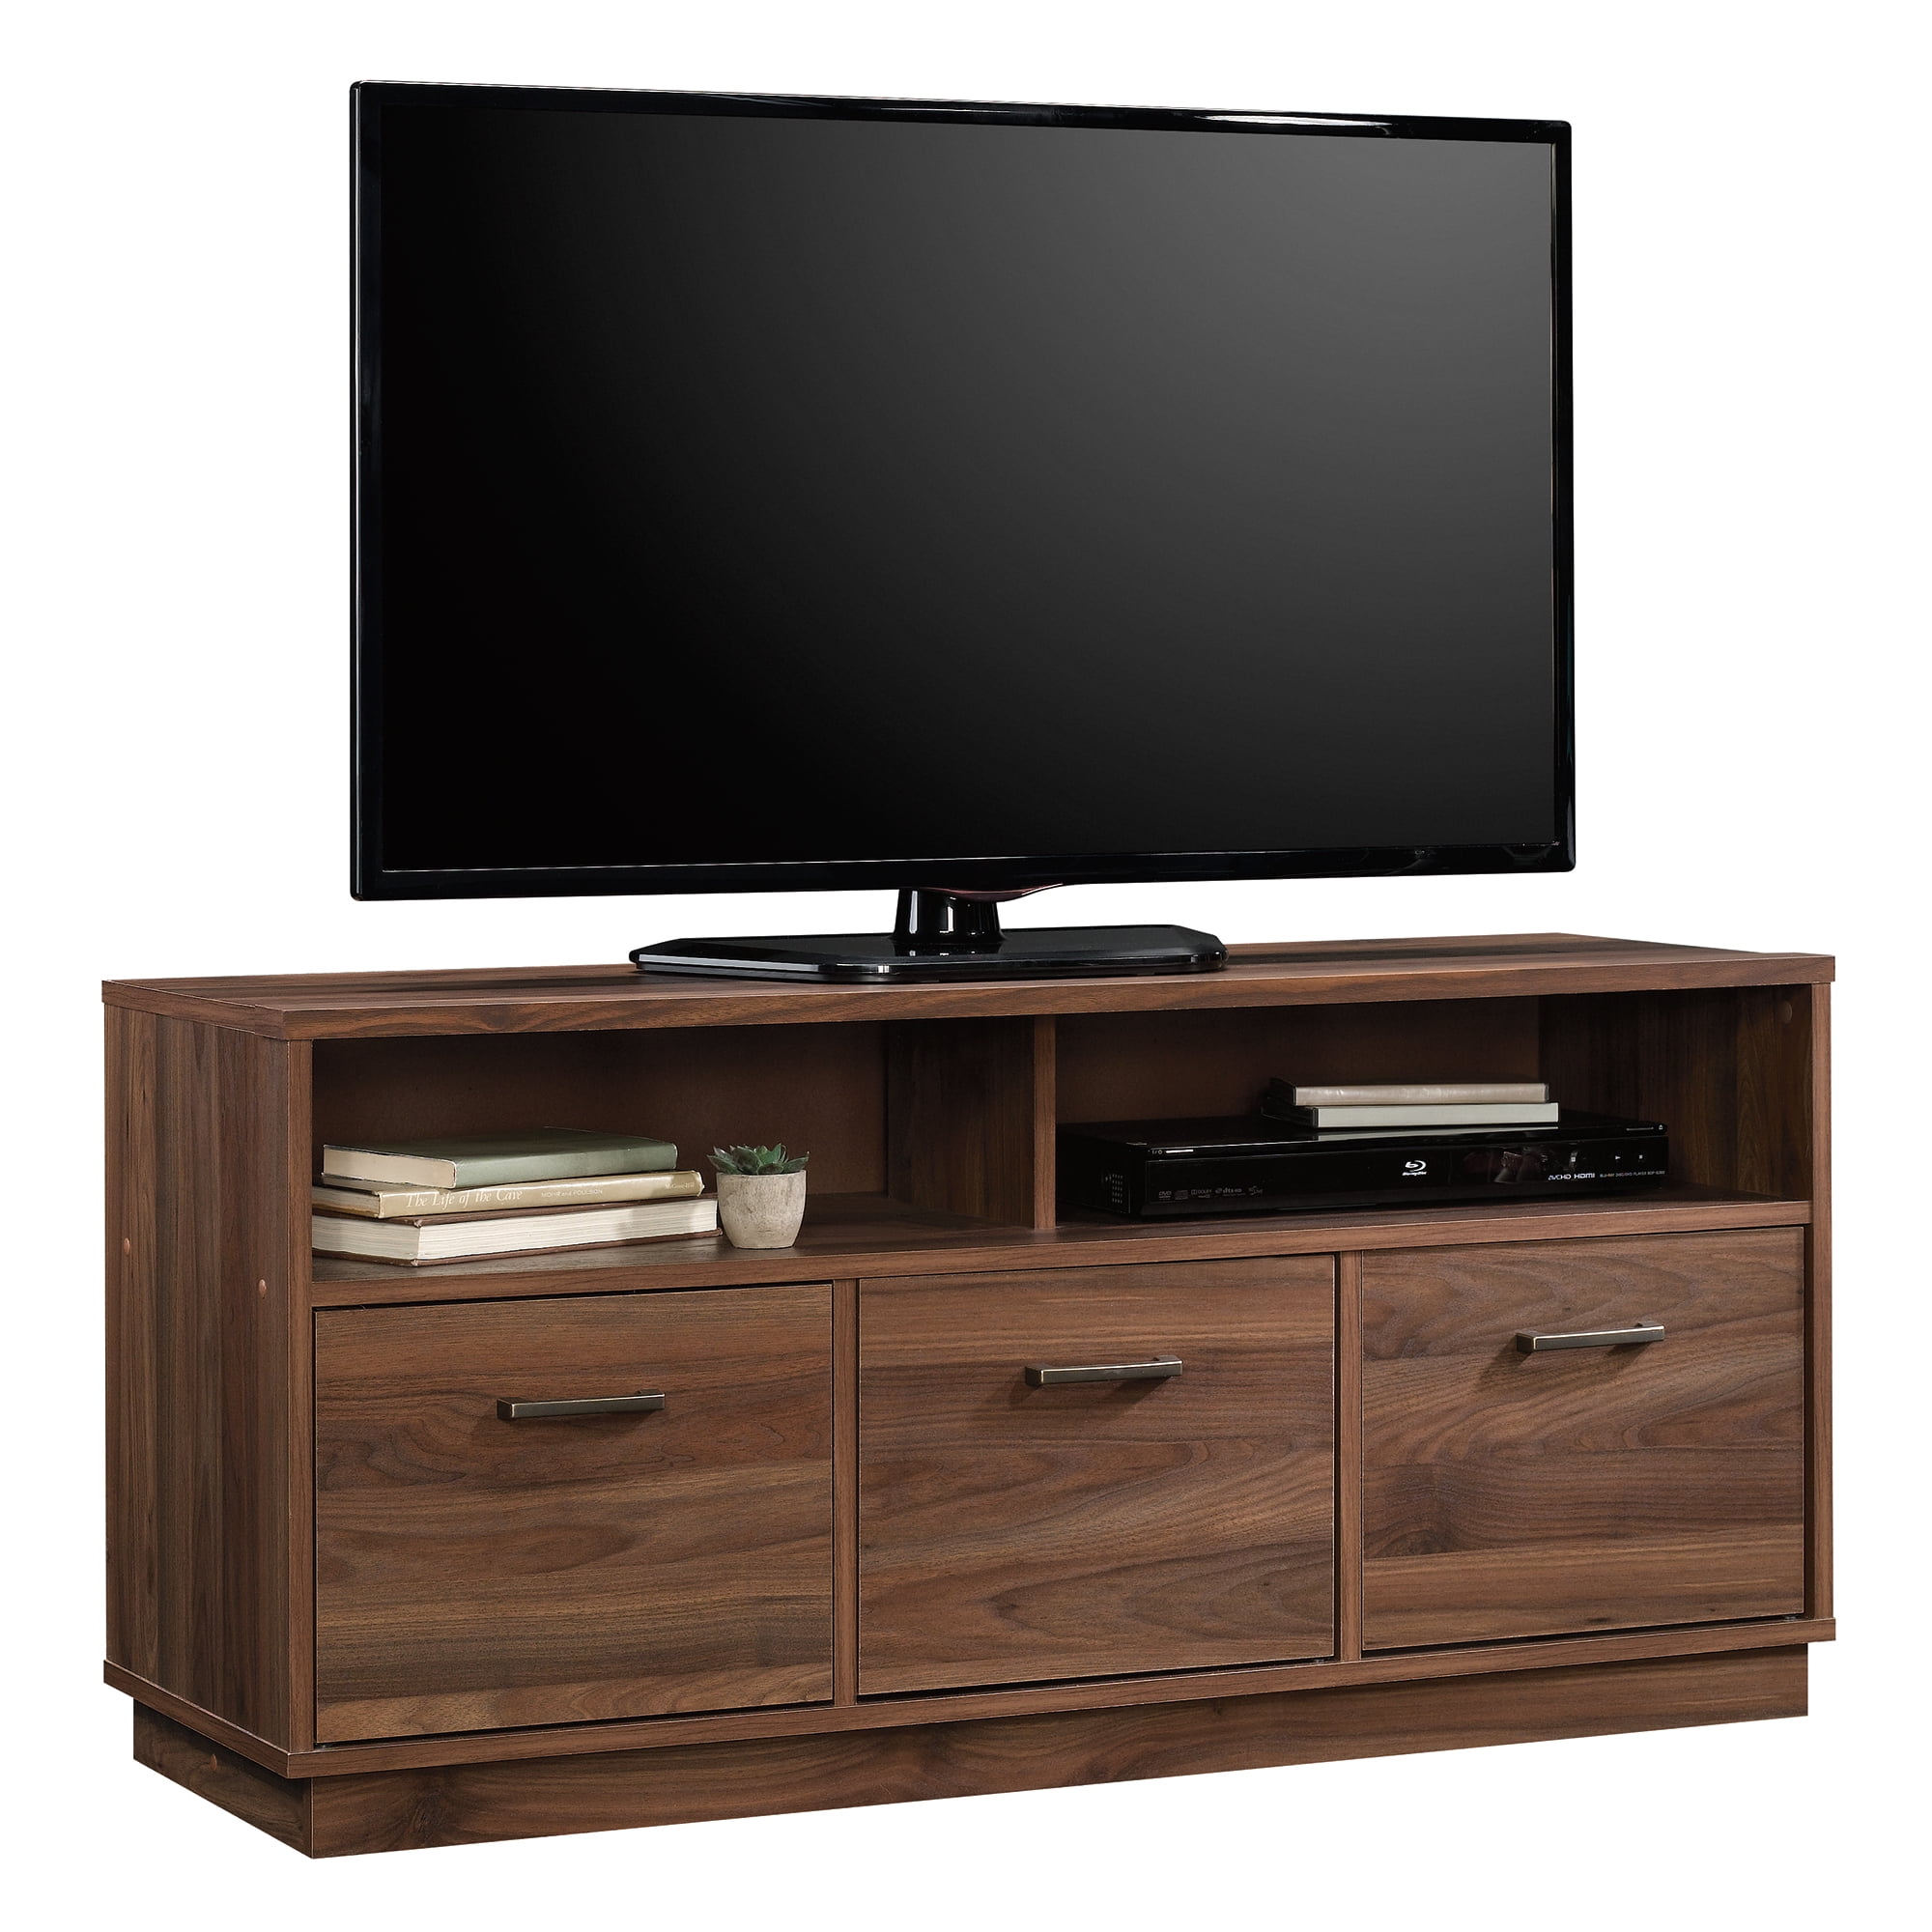 Mainstays 3-Door TV Stand Console for TVs up to 50 ...